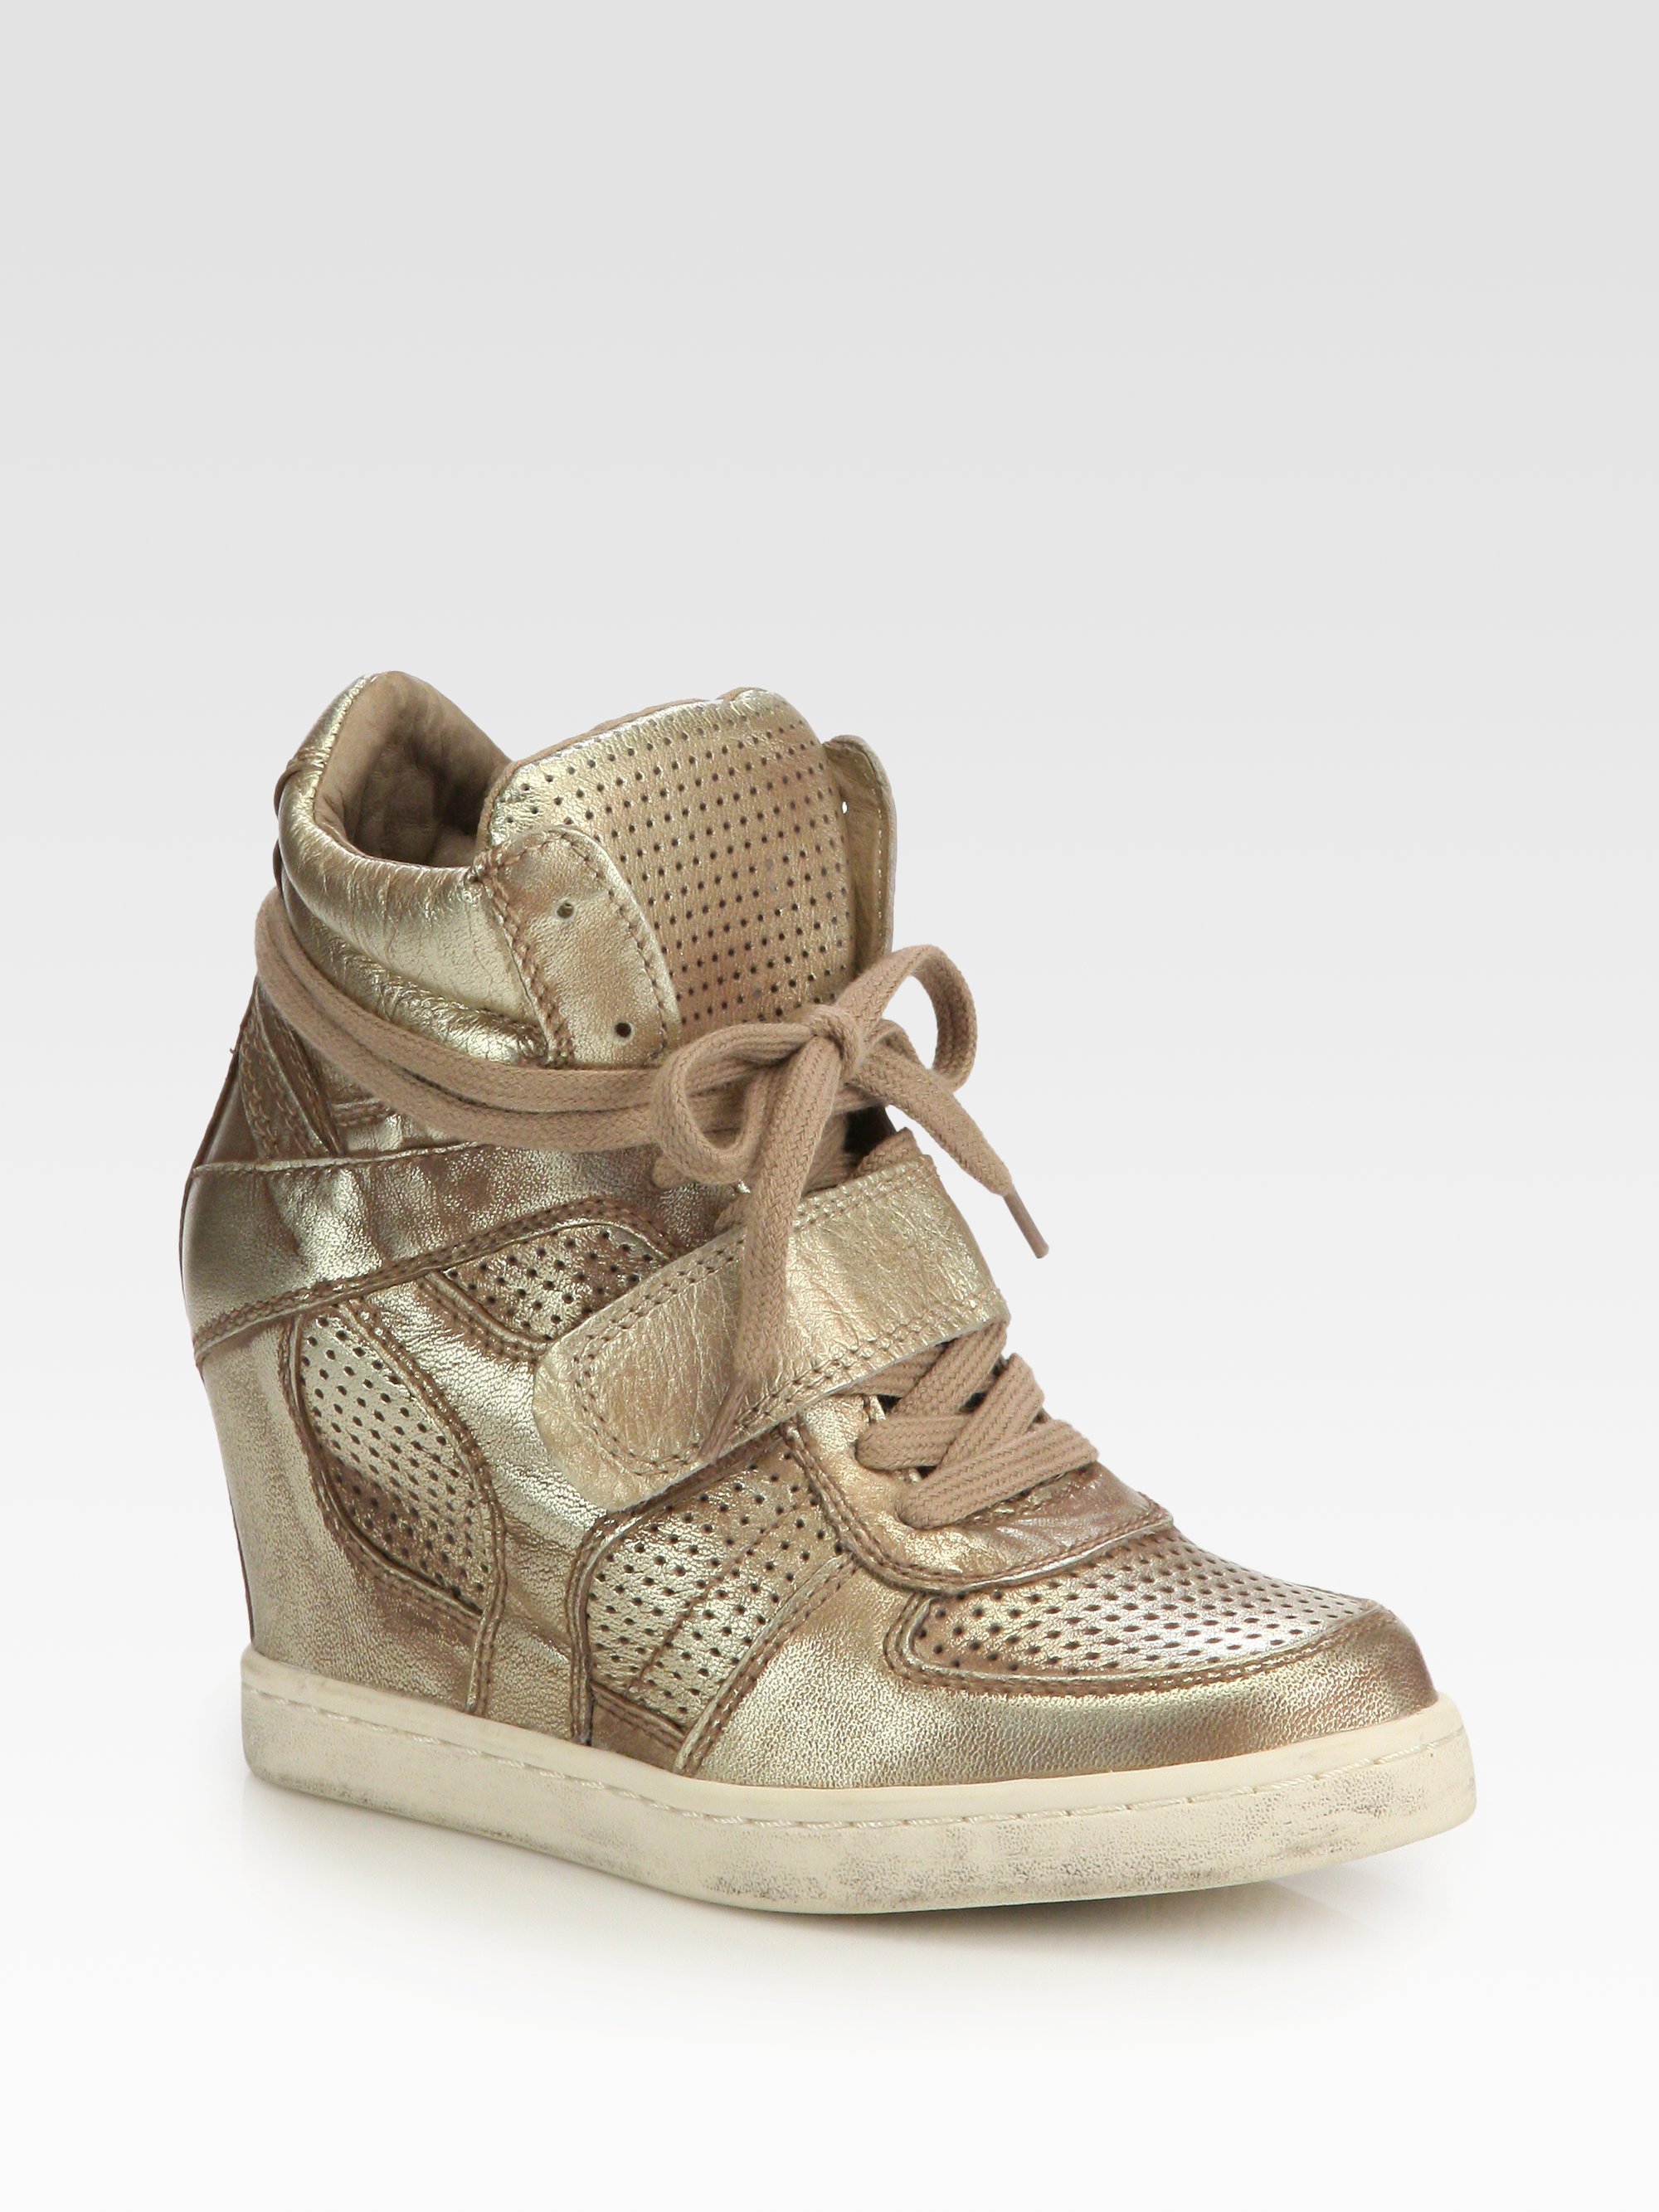 Ash Cool Metallic Leather High Top Wedge Sneakers in Gold | Lyst